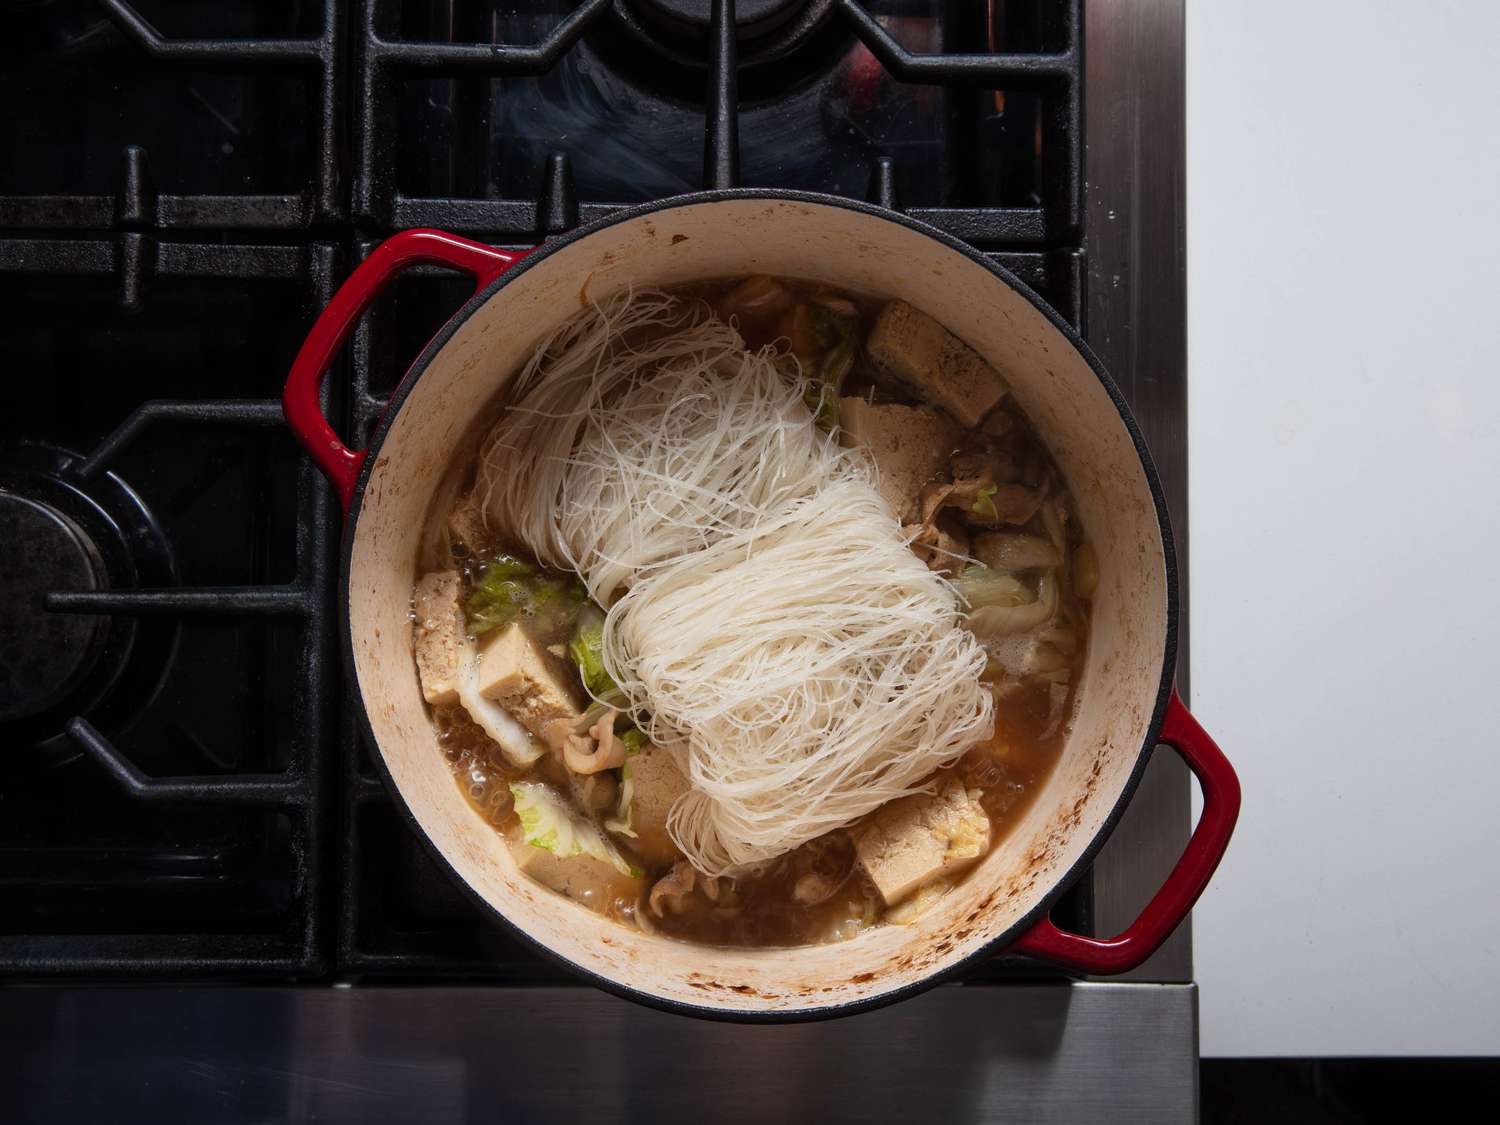 Soaked rice noodles on top of other contents of Dutch oven.